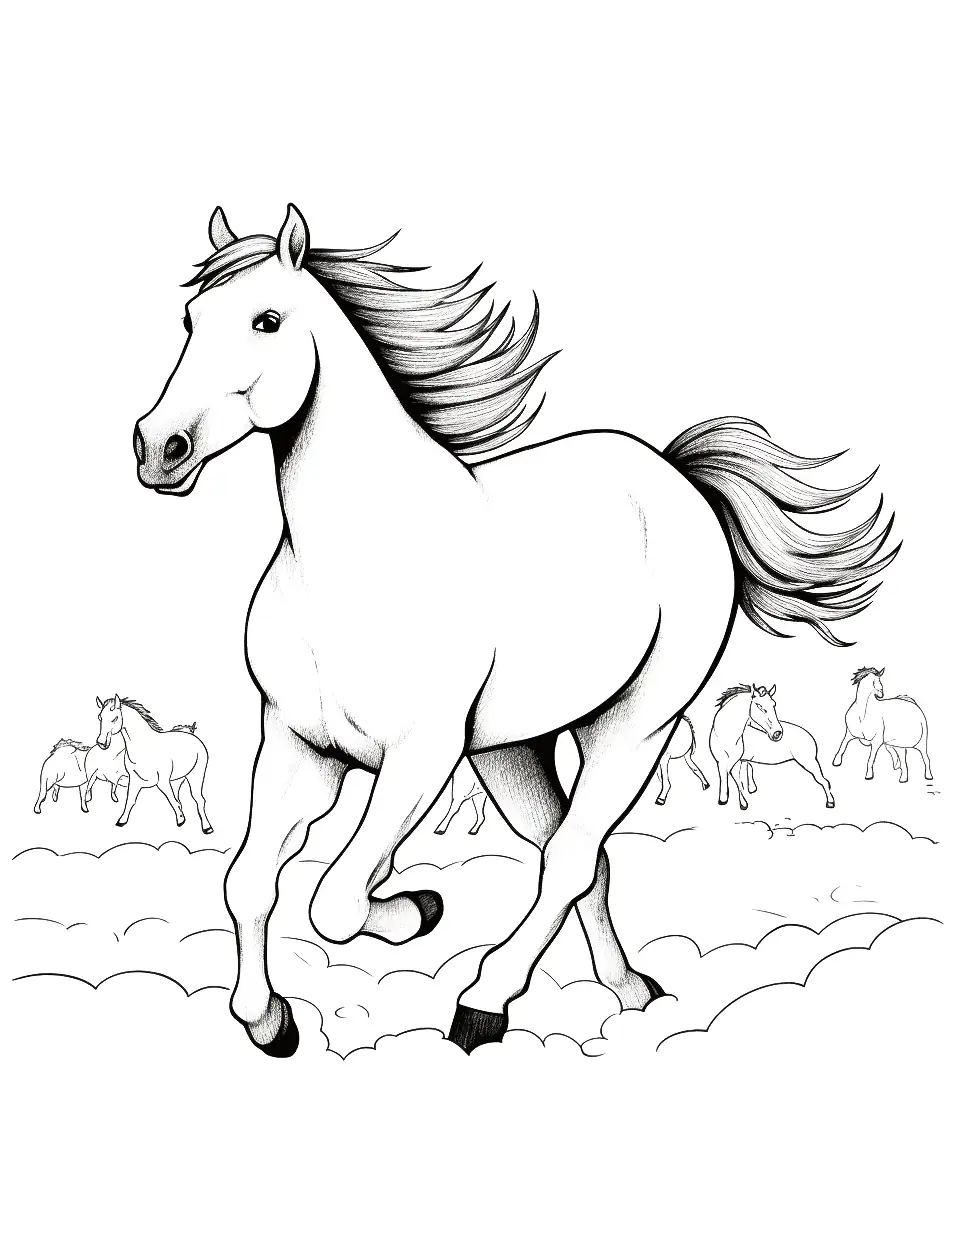 Running Mustang in the Wild Coloring Page - A wild Mustang horse running with a herd in the wild.